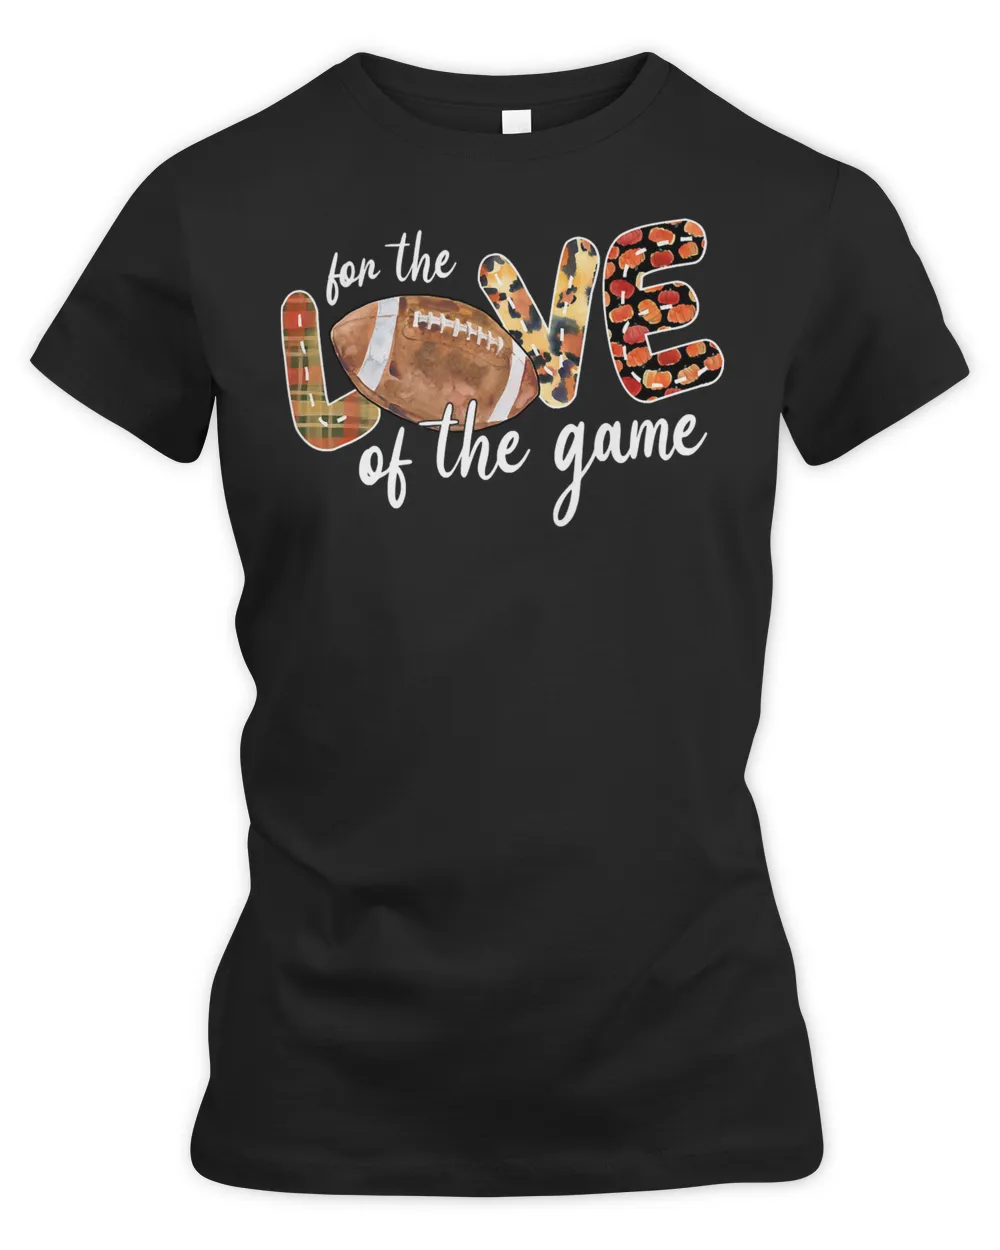 Football Love Football For The Love Of The Game Funny Game Day Lover 9 Football player